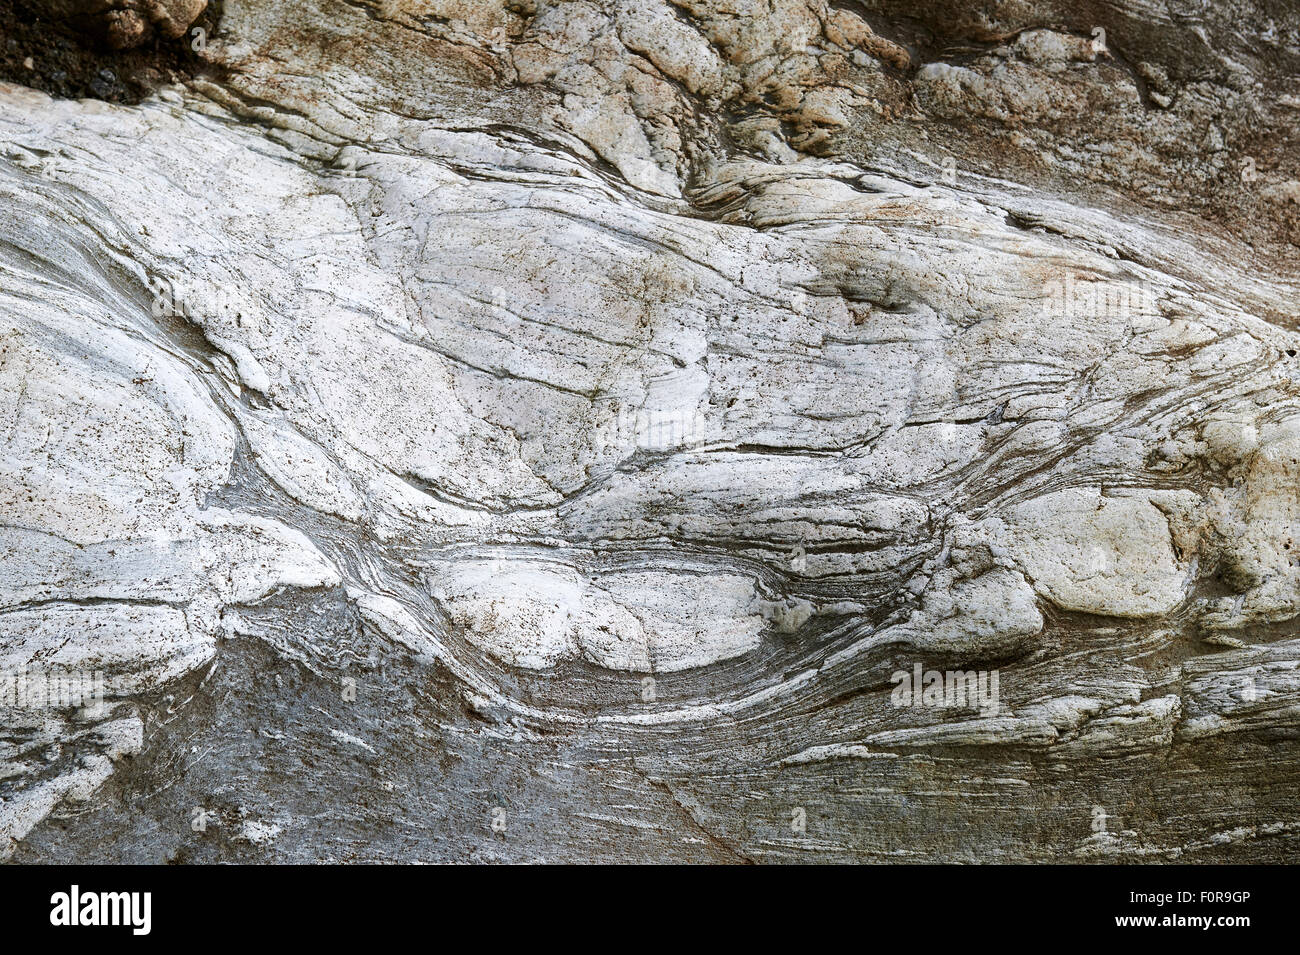 Metamorphic Rock Structures in Geological Outcrops below the Briksdalsbreen Glacier, Olden, Norway. Stock Photo